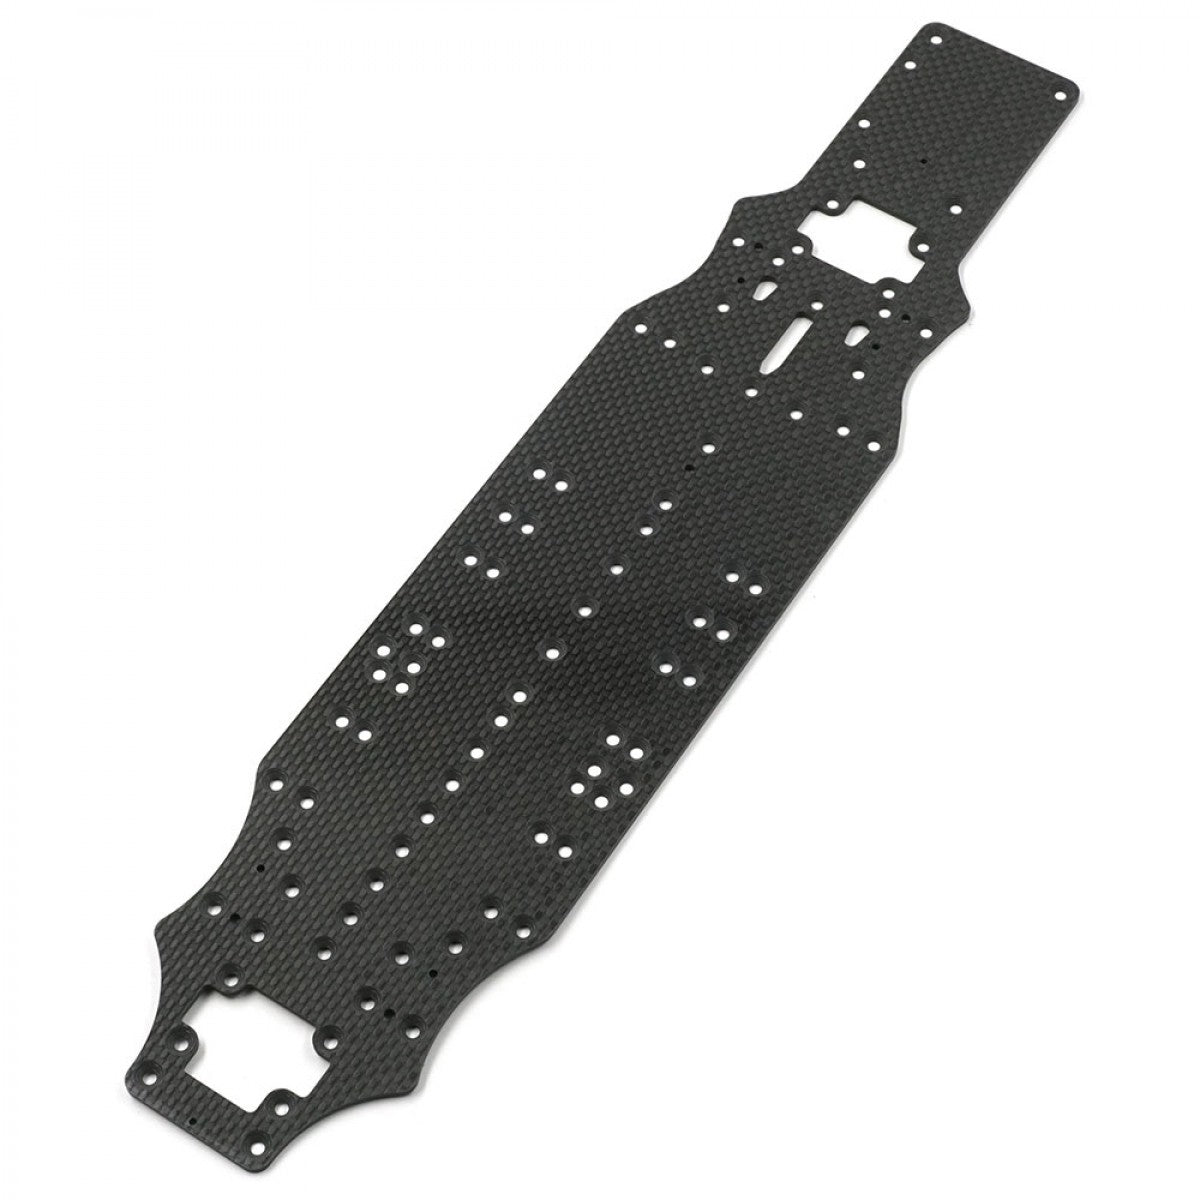 Xpress XP-10572 2.25mm Carbon Fiber Bottom Chassis Plate for FT1